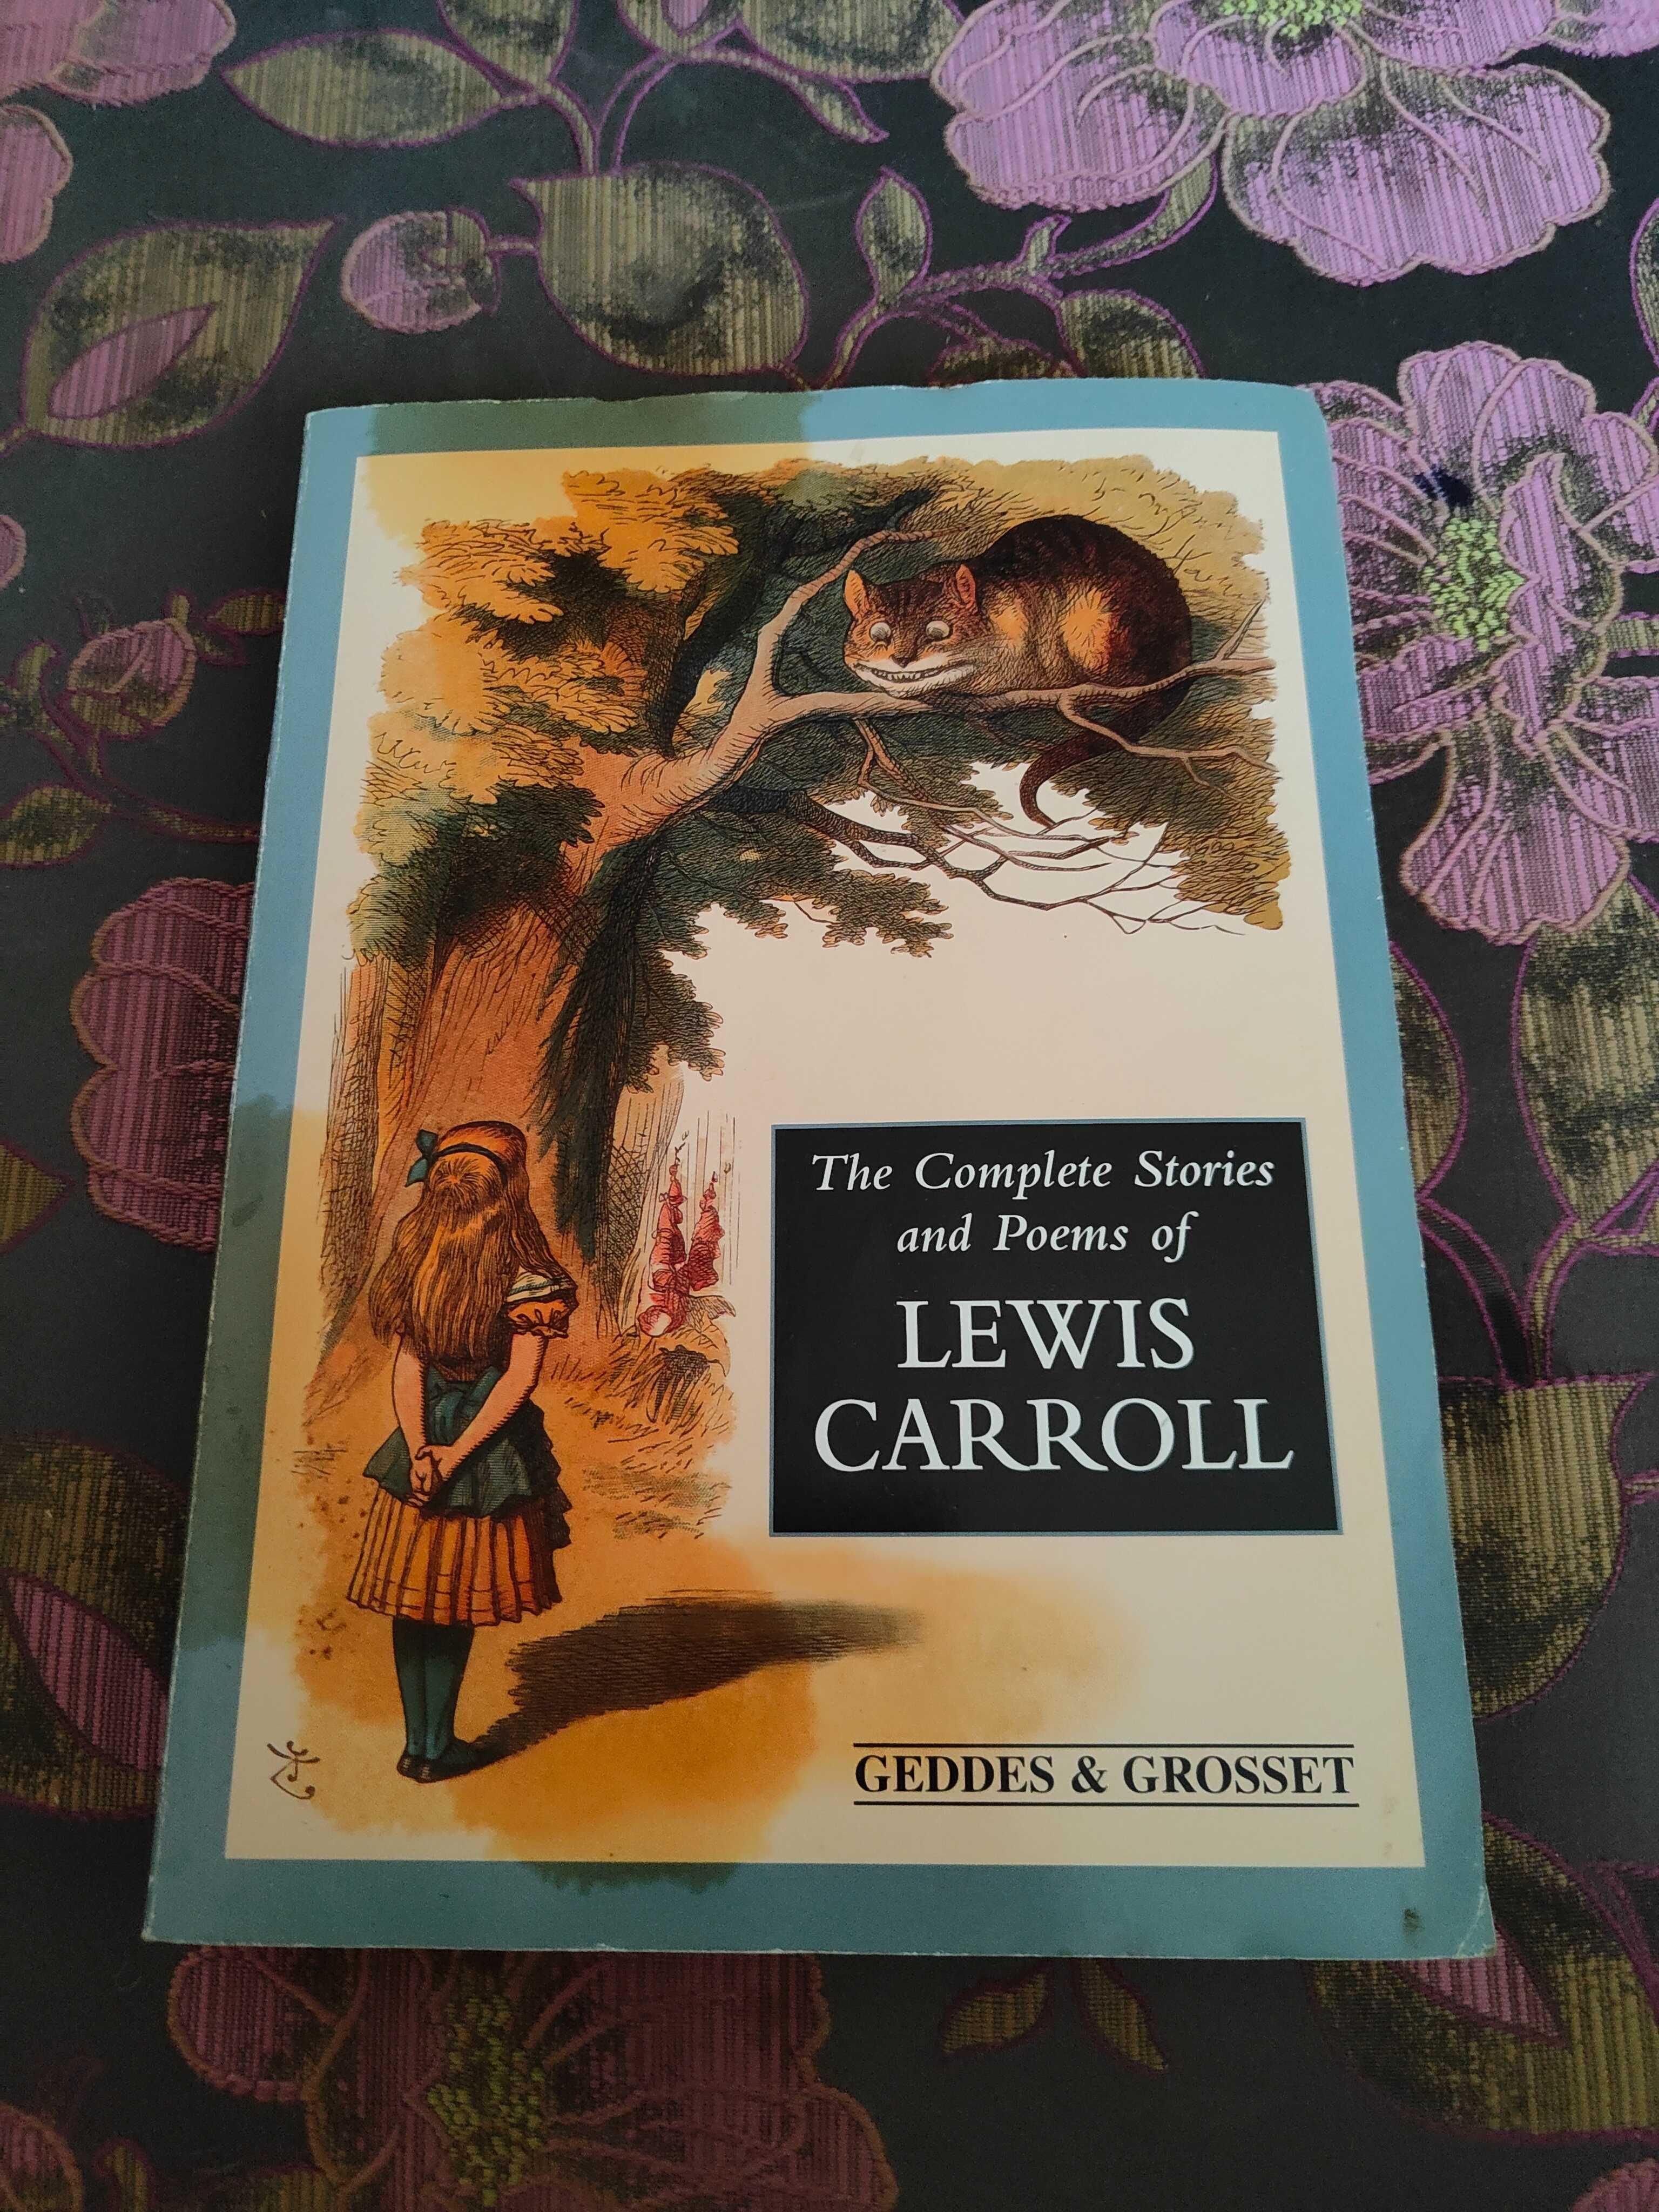 Carroll The Complete stories and Poems of. кэрролл на английском